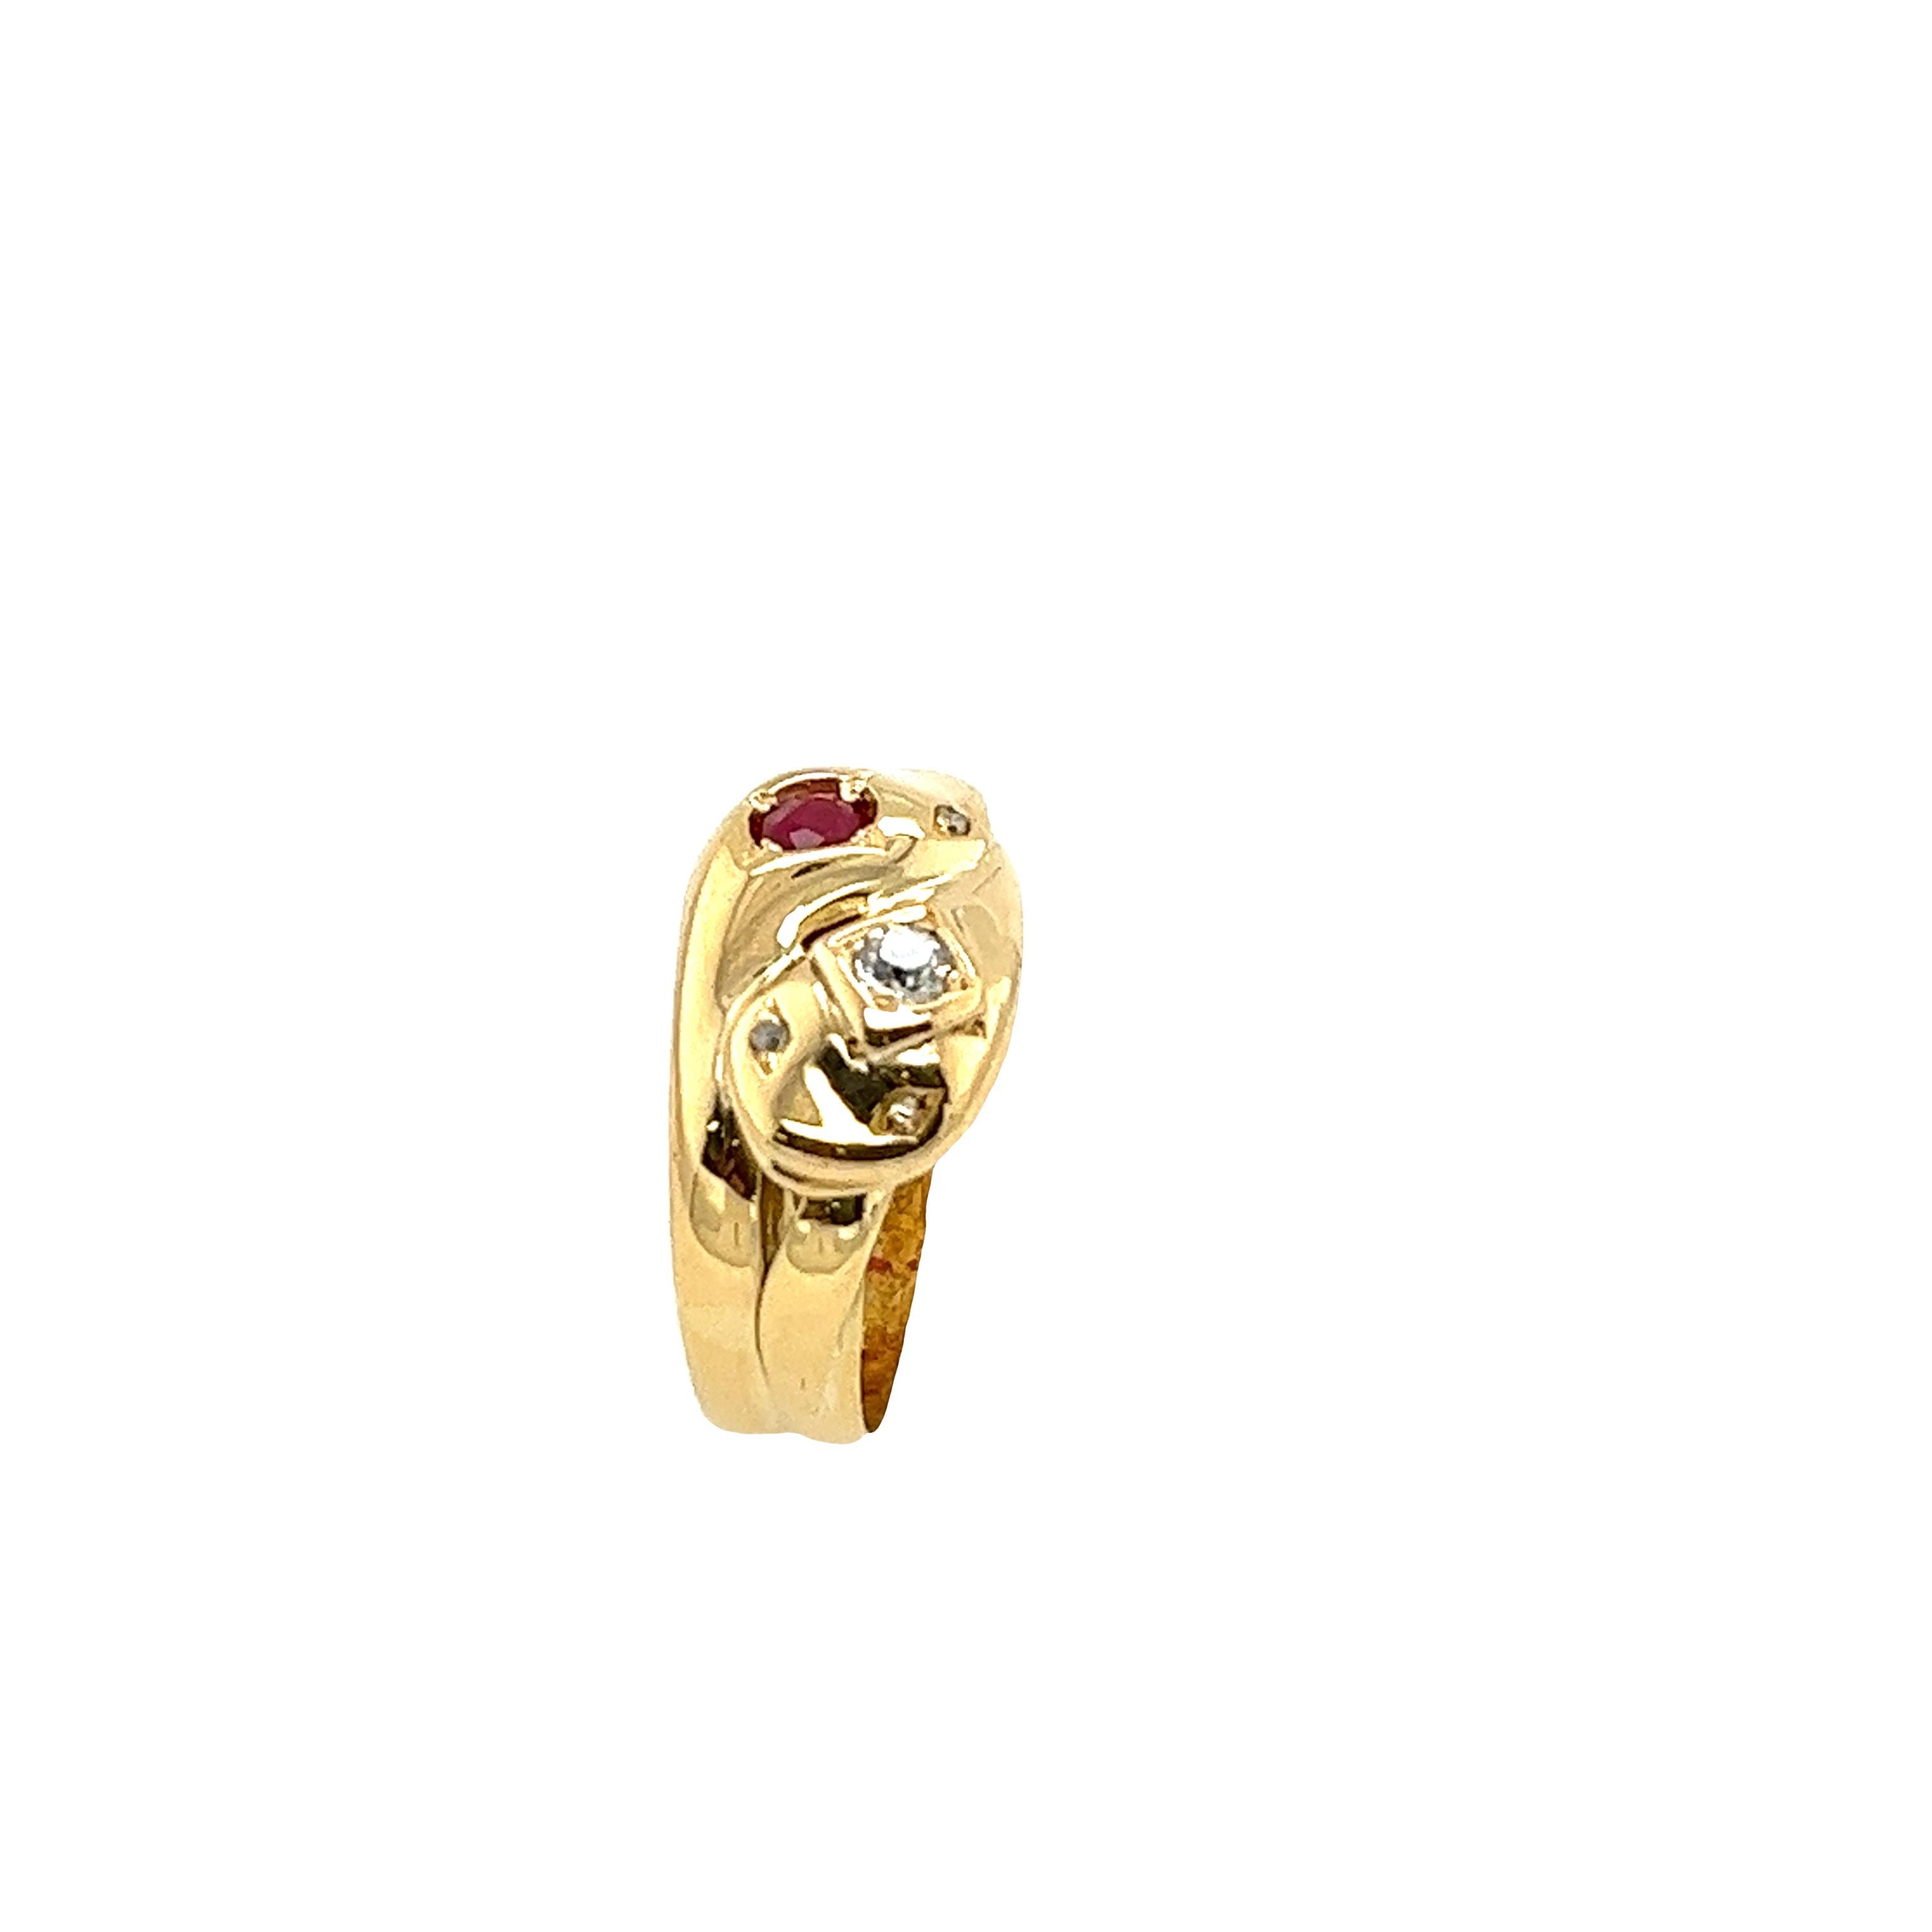 Vintage 18ct Yellow Gold Diamond & Ruby Ring, set in a double snakes head design with 0.10ct natural diamonds, and a round Ruby. 
There are also 4 old Victorian cut diamonds used for the 
snakes eyes. This ring is unique and perfect for wearing